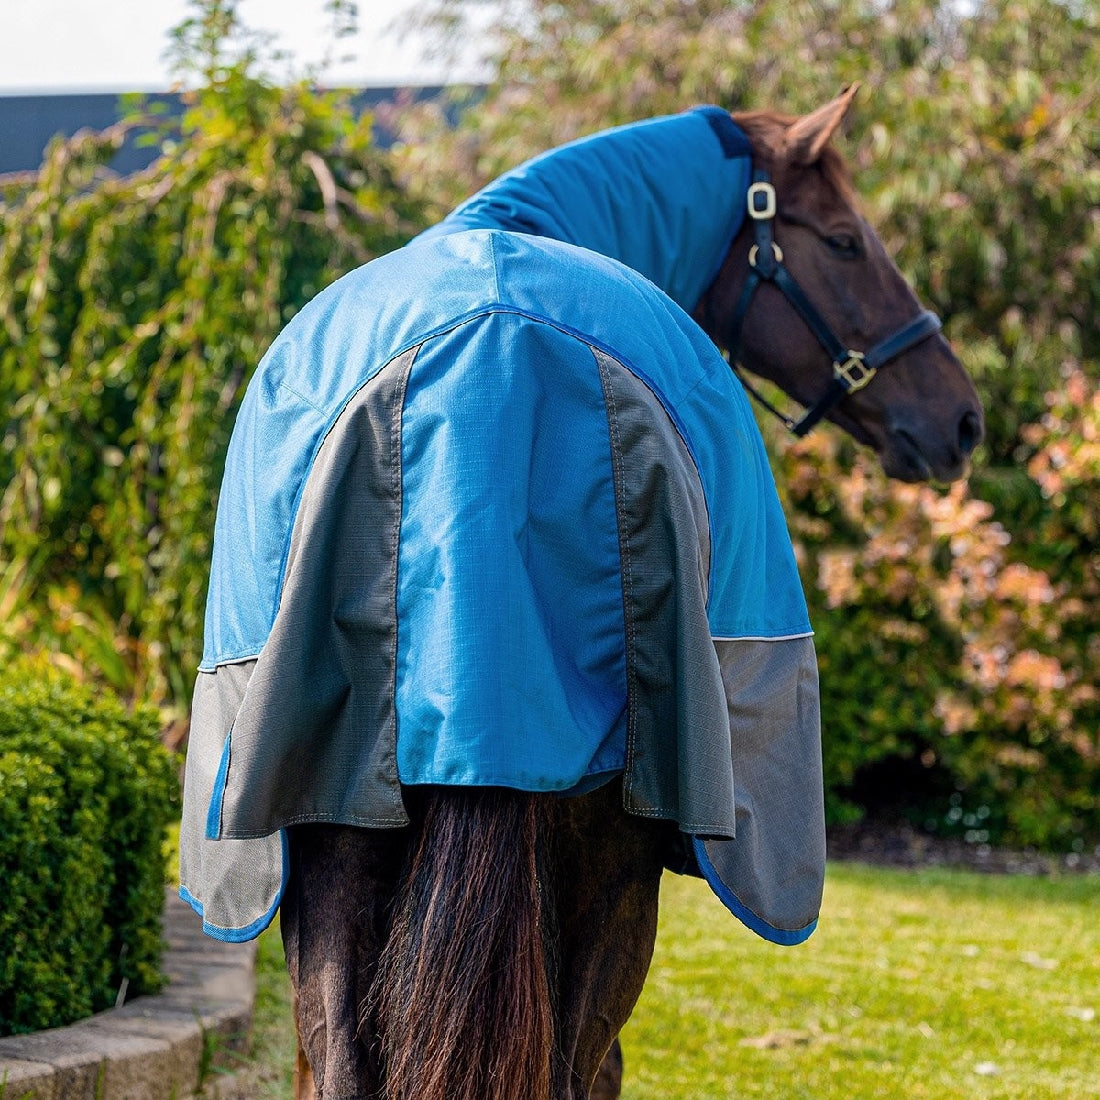 Horse wearing a blue and grey Eurohunter horse rug outside.